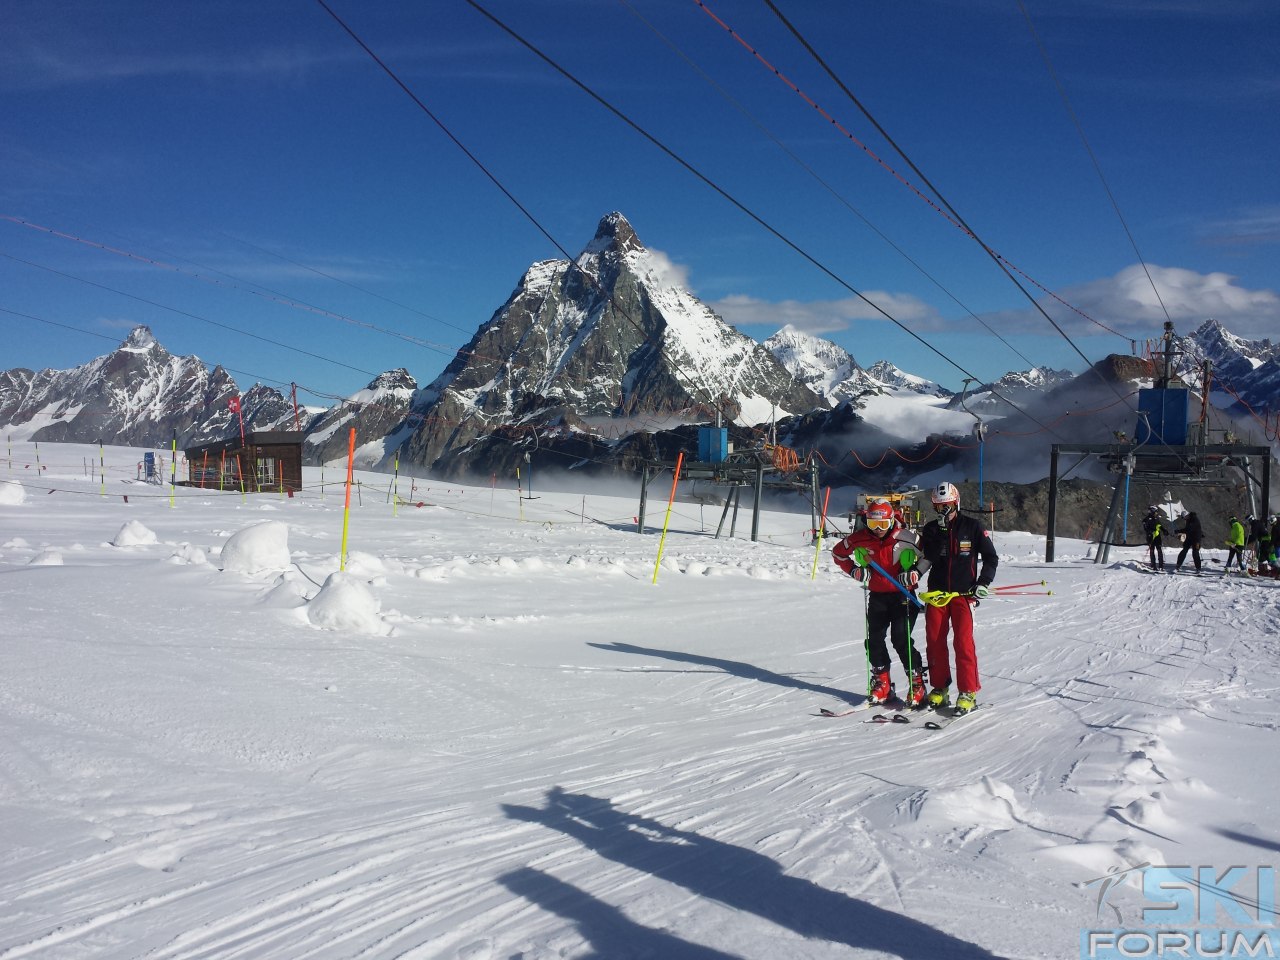 Stagione 219/2020 a Cervinia